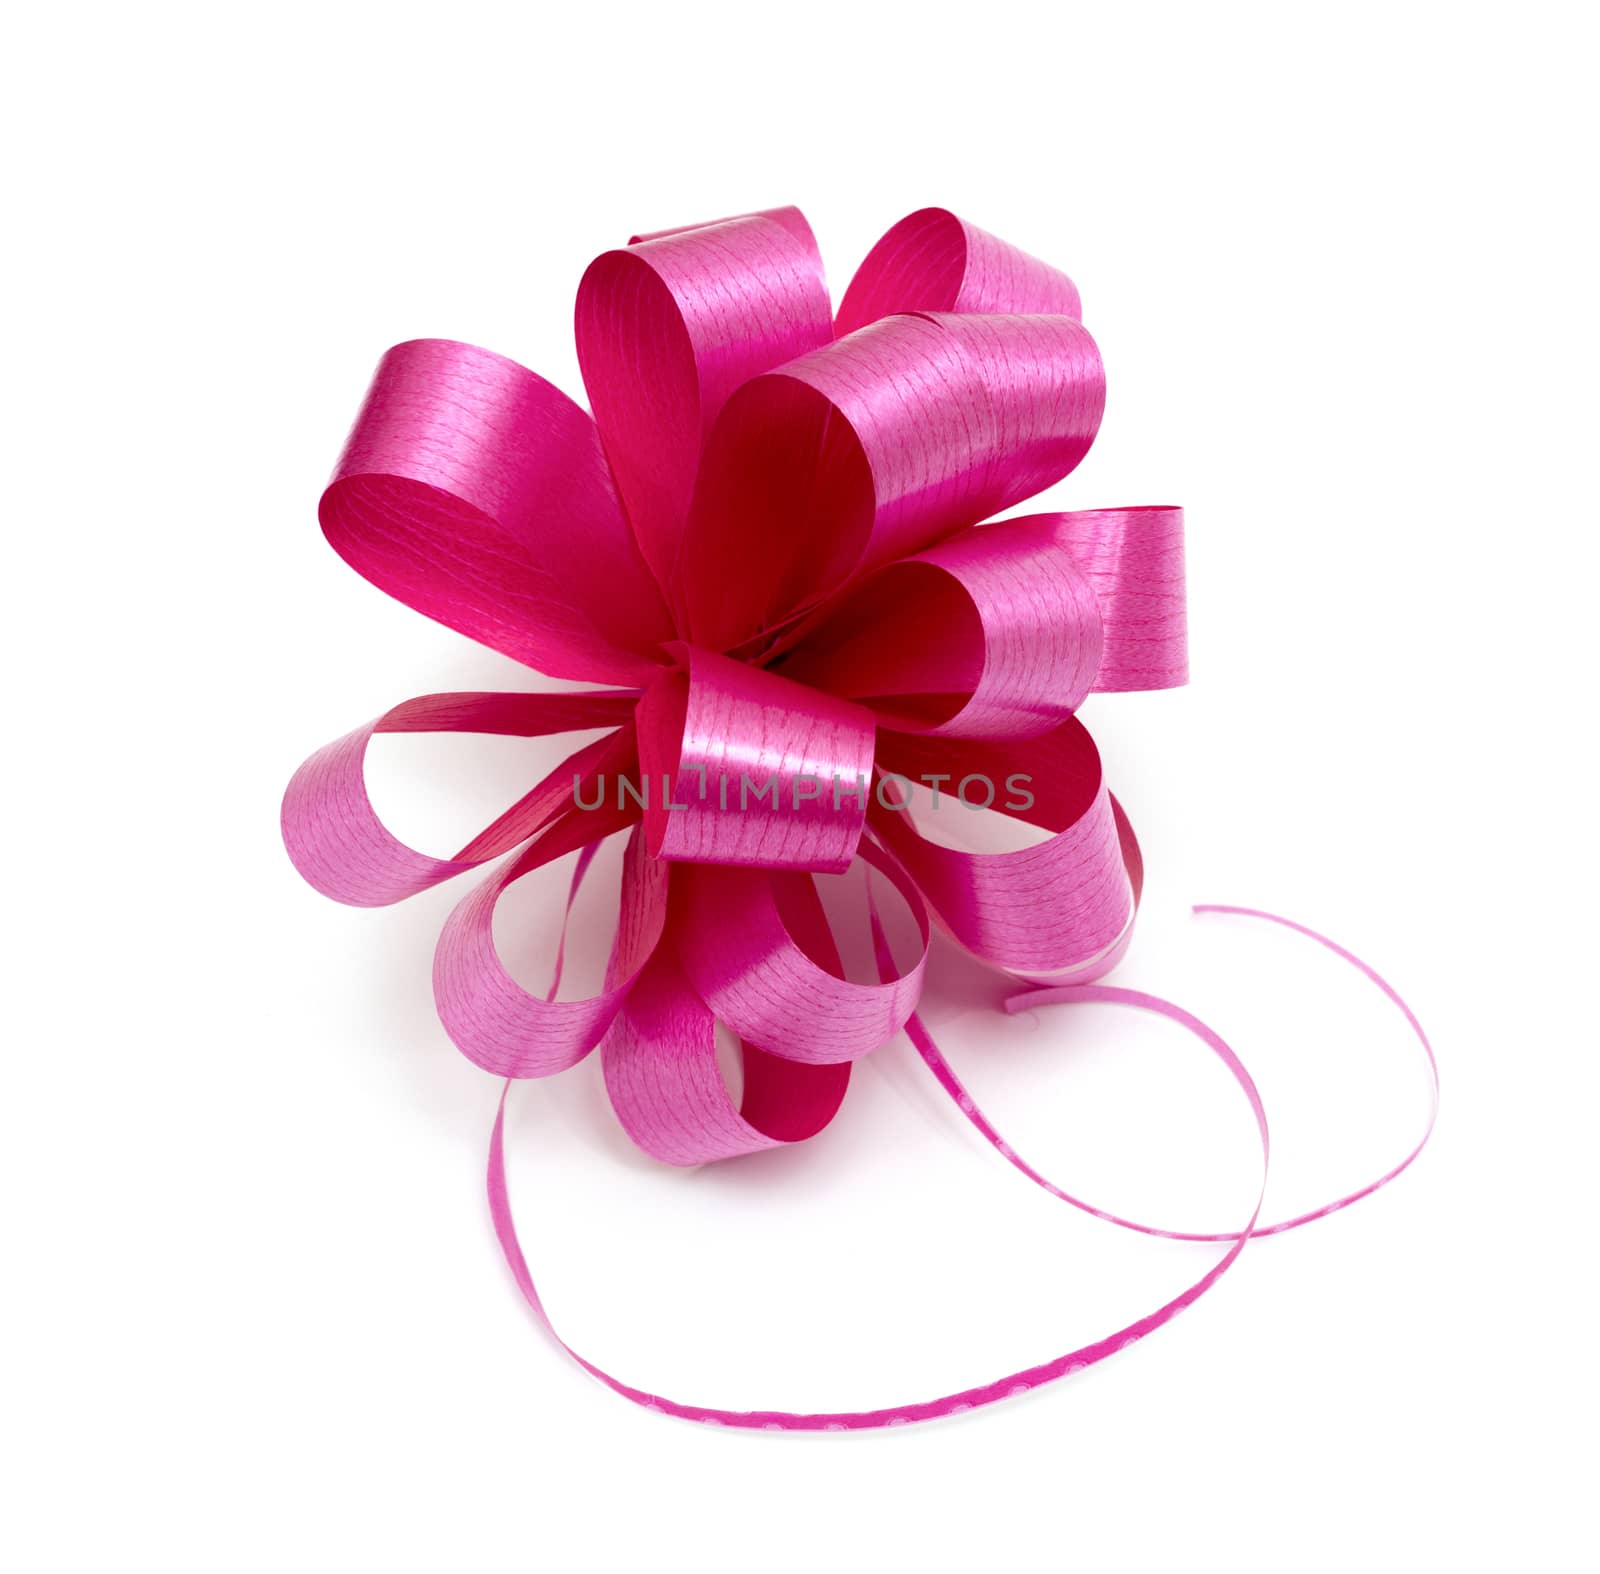 Big pink ribbon bow isolated on white